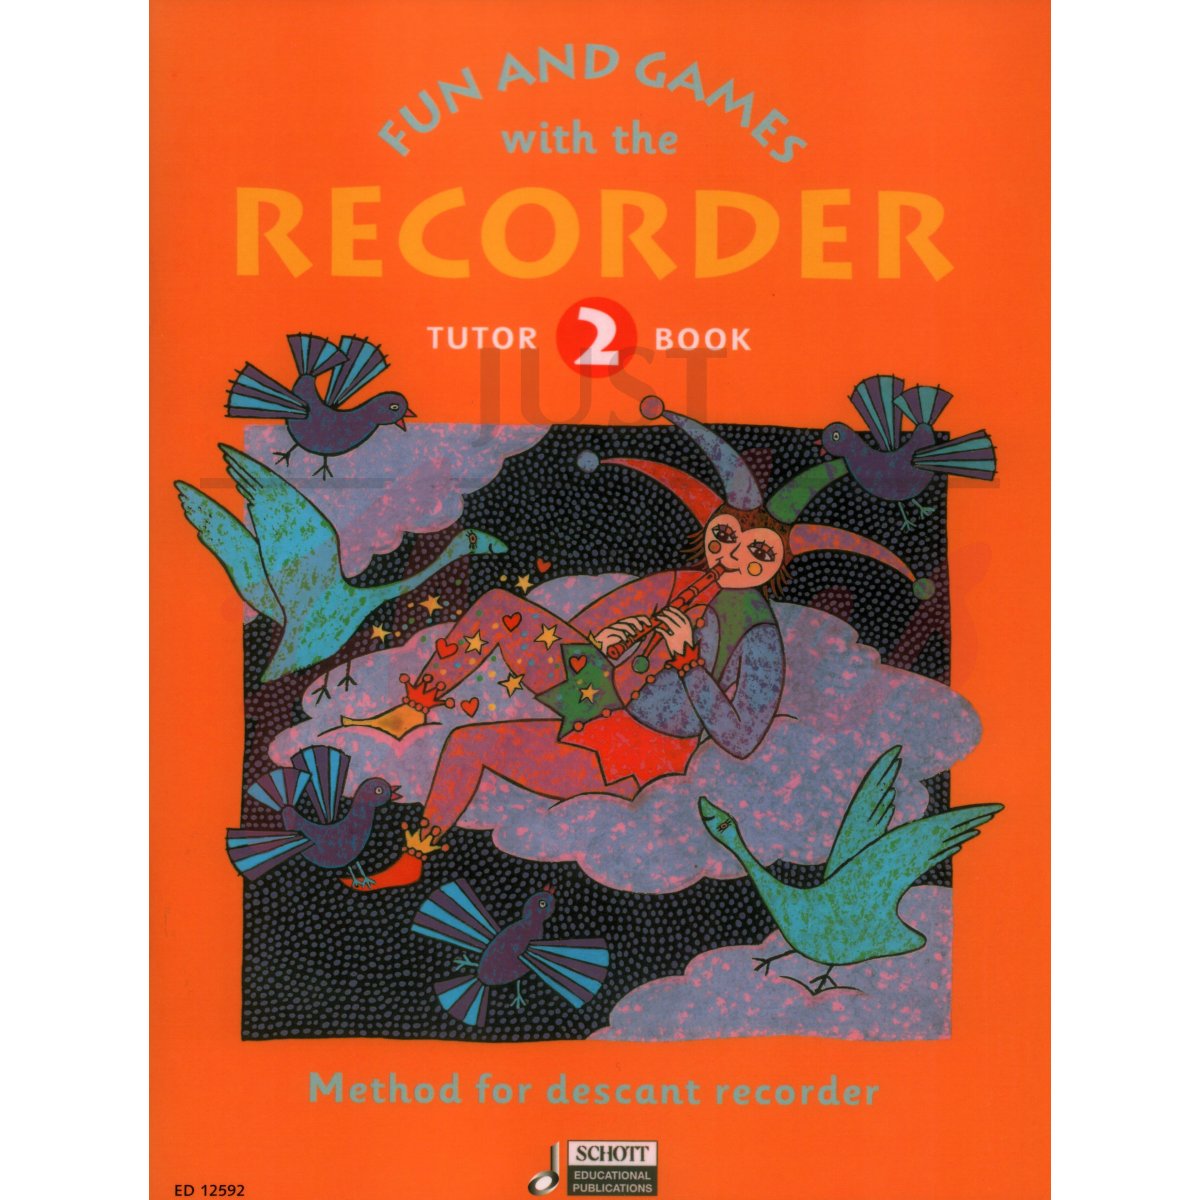 Fun and Games with the Recorder Tutor Book 2 [Descant Recorder]